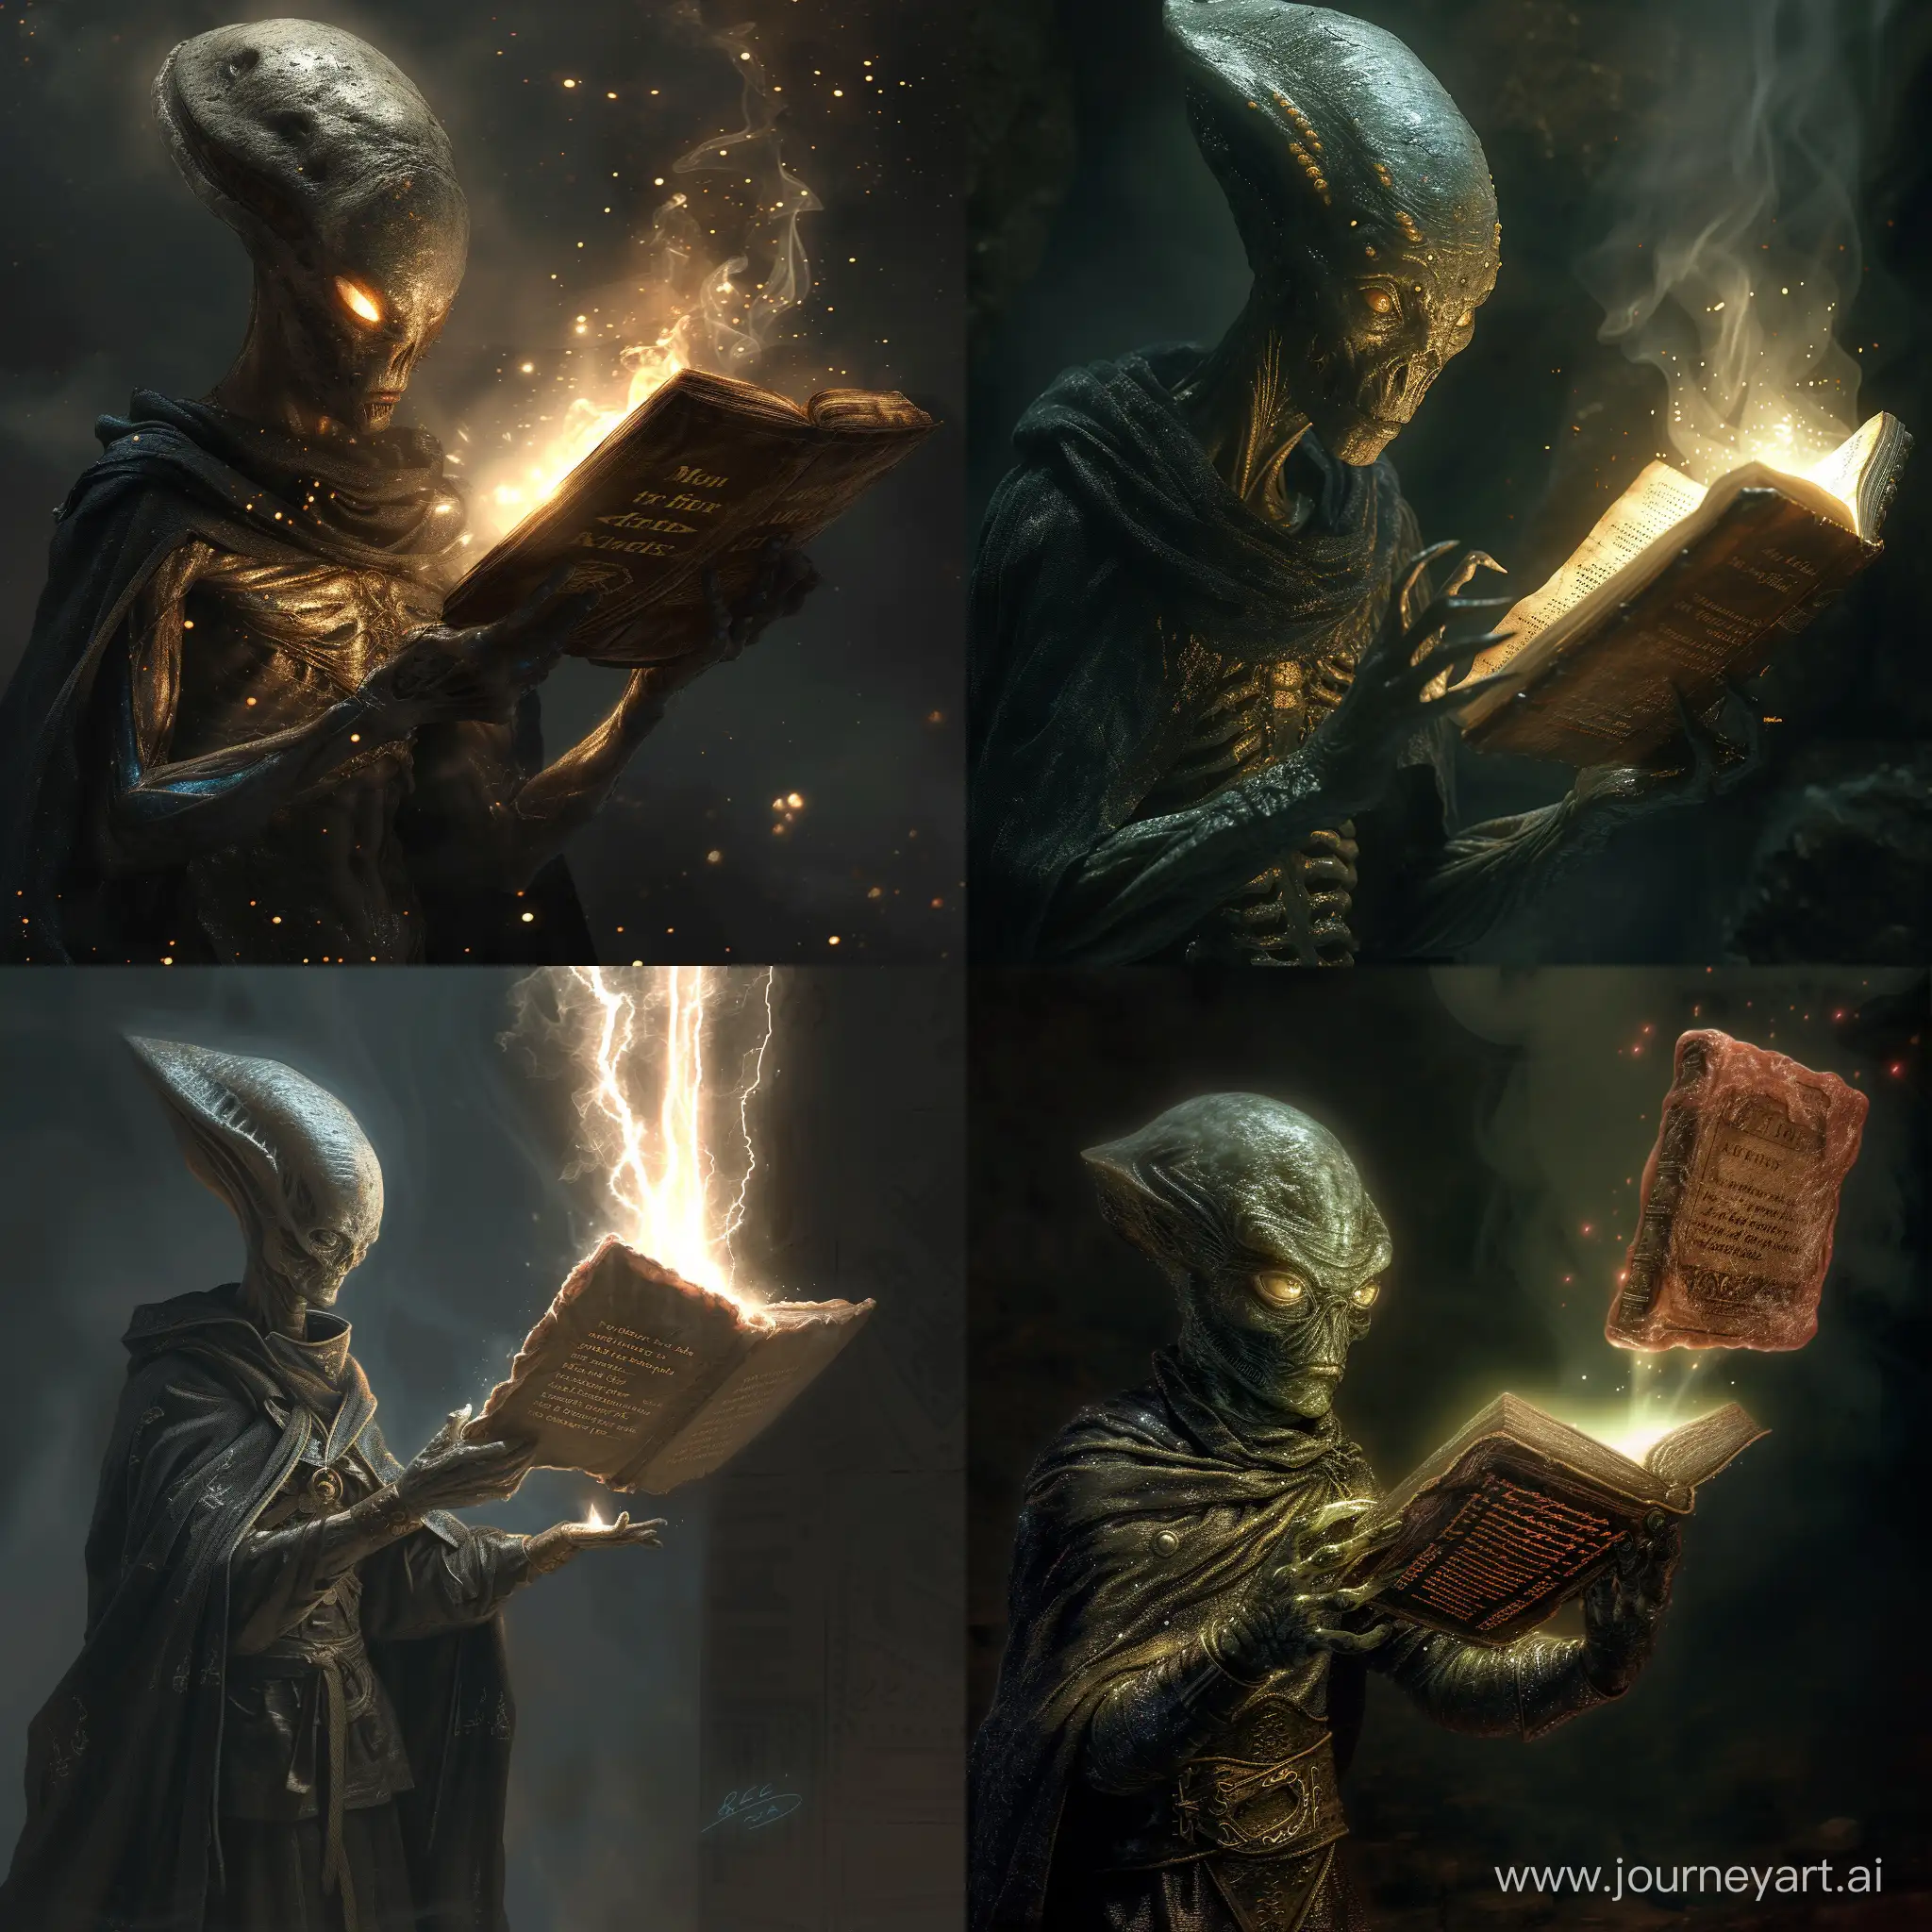 alien-sorcerer, conjuring up power from a floating, old skin-bound book, dramatic lighting, highly detailed
--ar 16:9